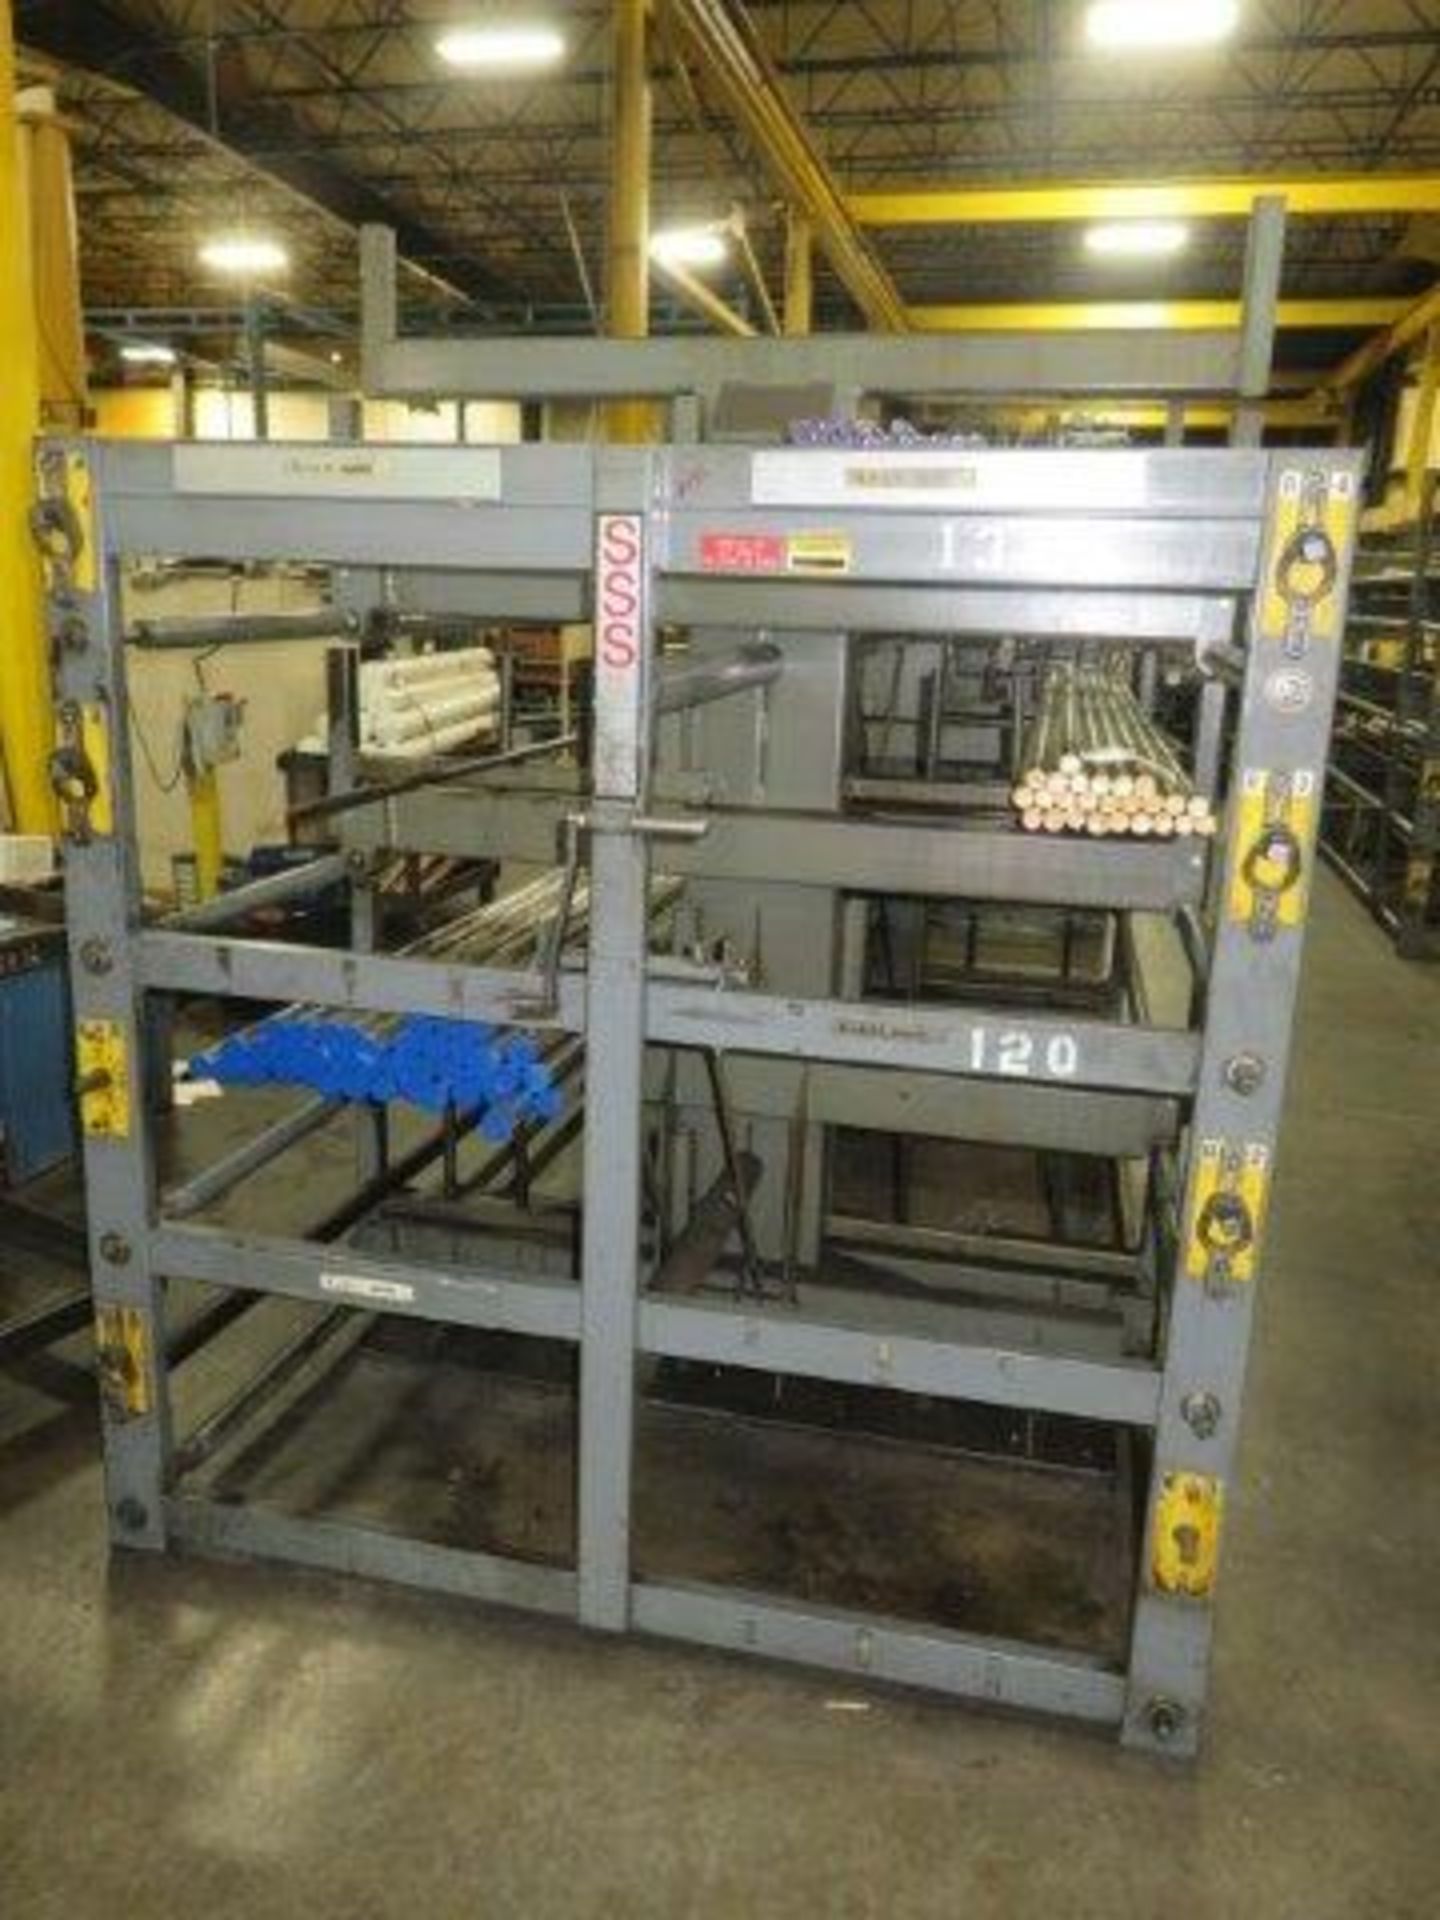 Carbon Steel Rods/Shafts (NEW Surplus Electrical Motor Parts) AND Distribution Metal Rack